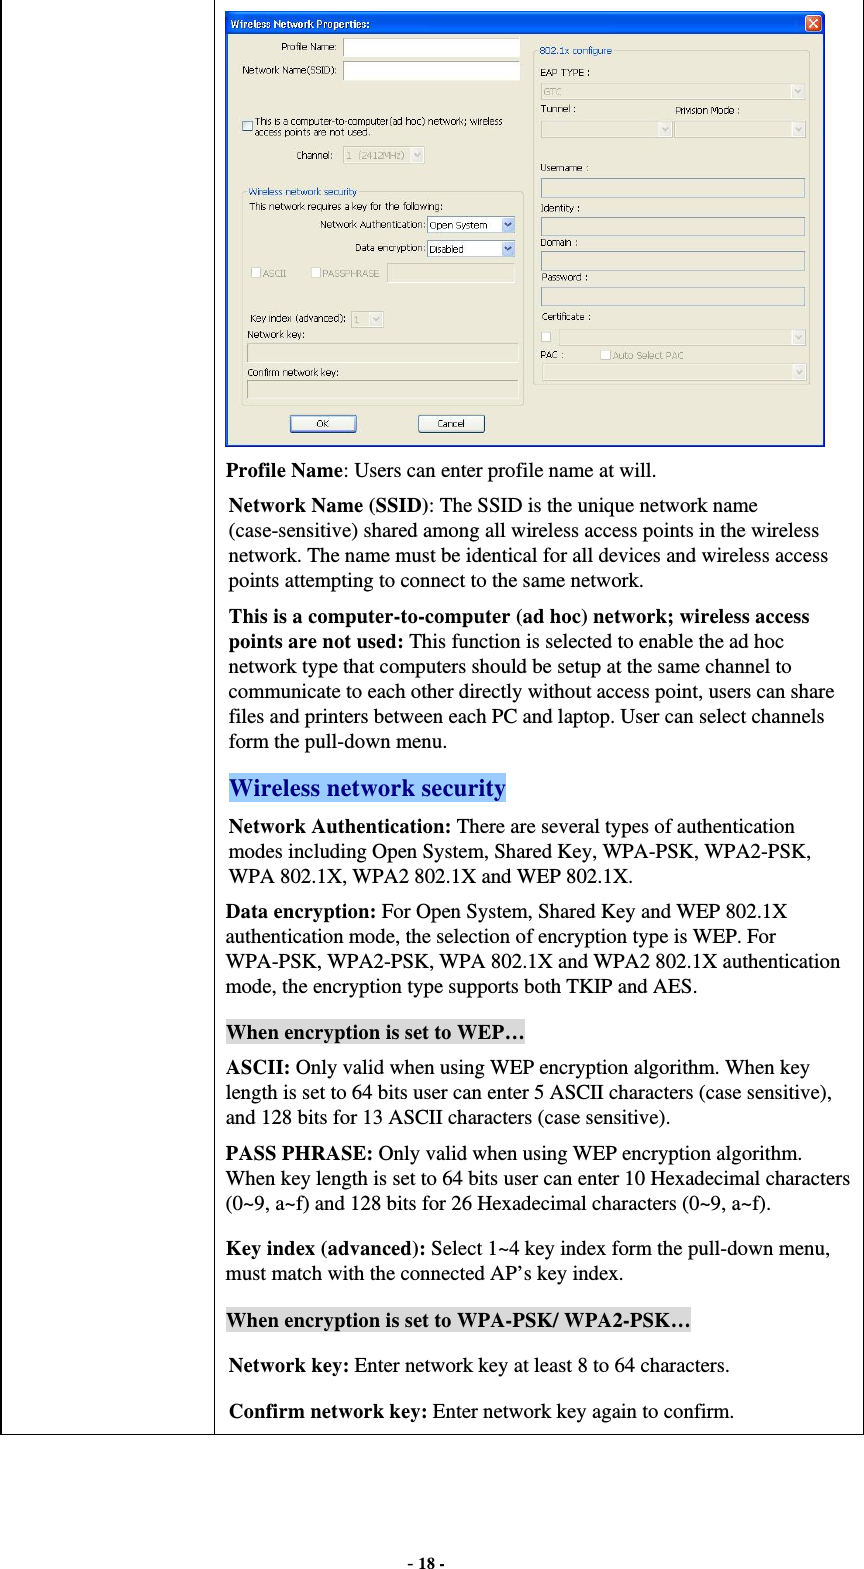  - 18 -  Profile Name: Users can enter profile name at will.   Network Name (SSID): The SSID is the unique network name (case-sensitive) shared among all wireless access points in the wireless network. The name must be identical for all devices and wireless access points attempting to connect to the same network. This is a computer-to-computer (ad hoc) network; wireless access points are not used: This function is selected to enable the ad hoc network type that computers should be setup at the same channel to communicate to each other directly without access point, users can share files and printers between each PC and laptop. User can select channels form the pull-down menu. Wireless network security Network Authentication: There are several types of authentication modes including Open System, Shared Key, WPA-PSK, WPA2-PSK, WPA 802.1X, WPA2 802.1X and WEP 802.1X. Data encryption: For Open System, Shared Key and WEP 802.1X authentication mode, the selection of encryption type is WEP. For WPA-PSK, WPA2-PSK, WPA 802.1X and WPA2 802.1X authentication mode, the encryption type supports both TKIP and AES. When encryption is set to WEP… ASCII: Only valid when using WEP encryption algorithm. When key length is set to 64 bits user can enter 5 ASCII characters (case sensitive), and 128 bits for 13 ASCII characters (case sensitive). PASS PHRASE: Only valid when using WEP encryption algorithm. When key length is set to 64 bits user can enter 10 Hexadecimal characters (0~9, a~f) and 128 bits for 26 Hexadecimal characters (0~9, a~f). Key index (advanced): Select 1~4 key index form the pull-down menu, must match with the connected AP’s key index. When encryption is set to WPA-PSK/ WPA2-PSK… Network key: Enter network key at least 8 to 64 characters. Confirm network key: Enter network key again to confirm. 